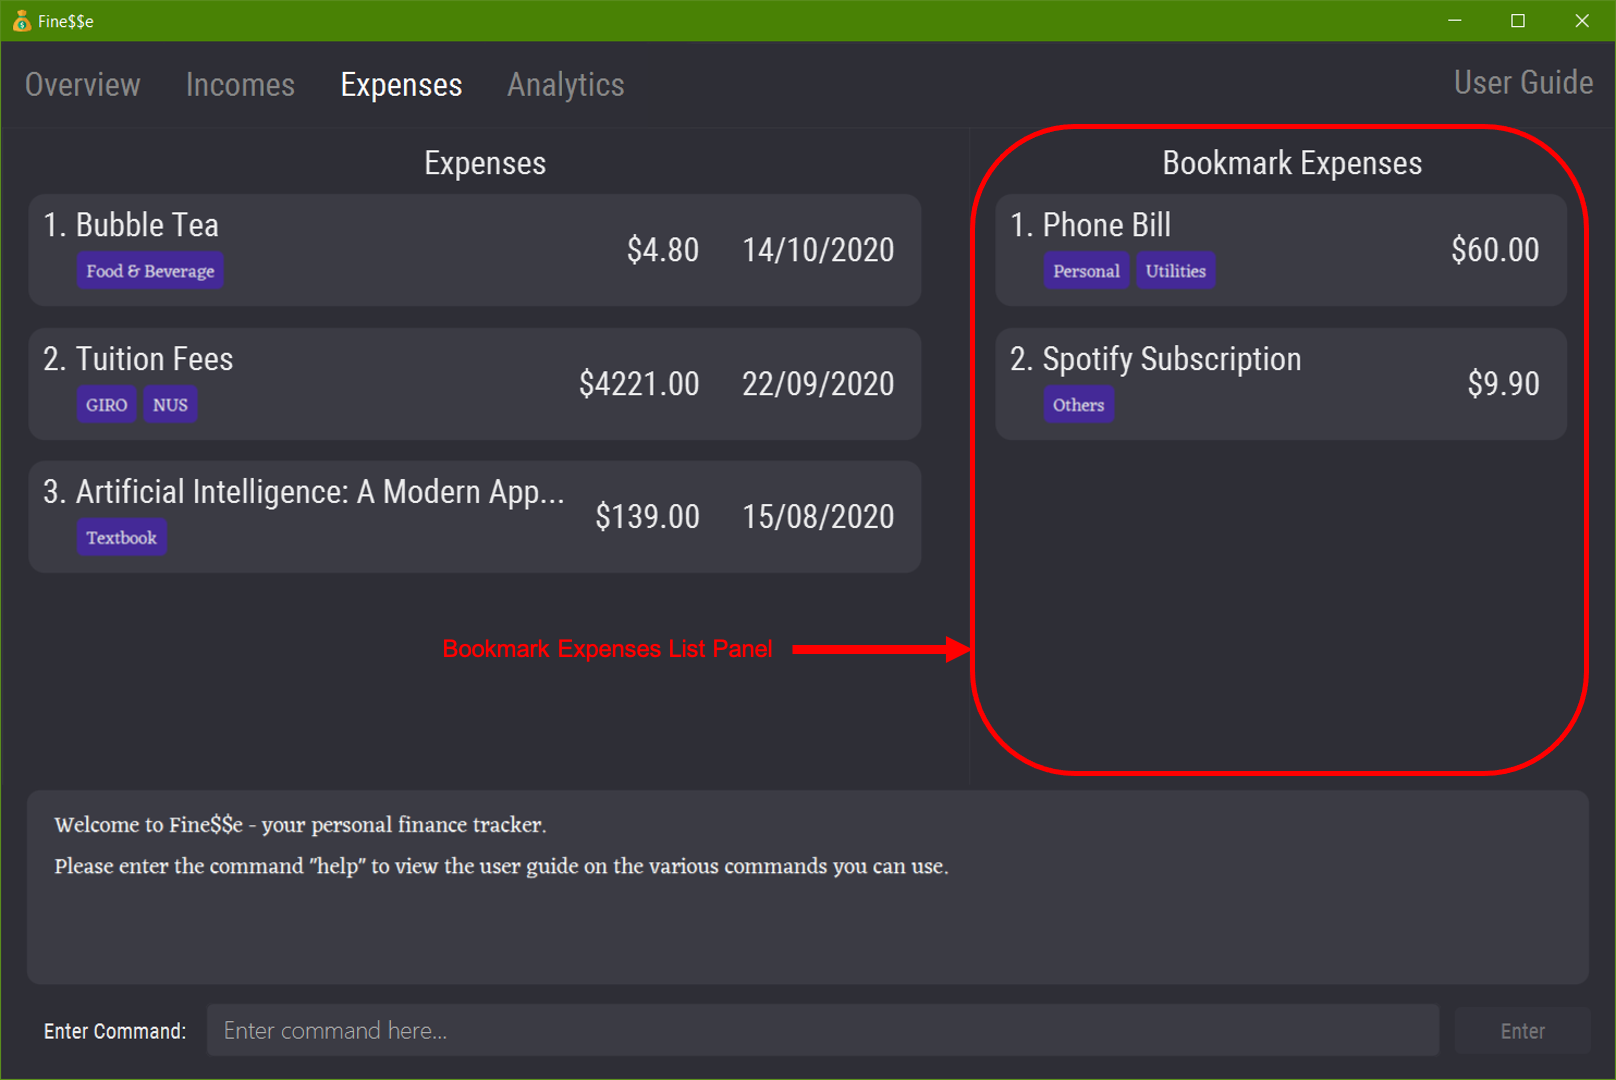 Bookmark Expense Overview